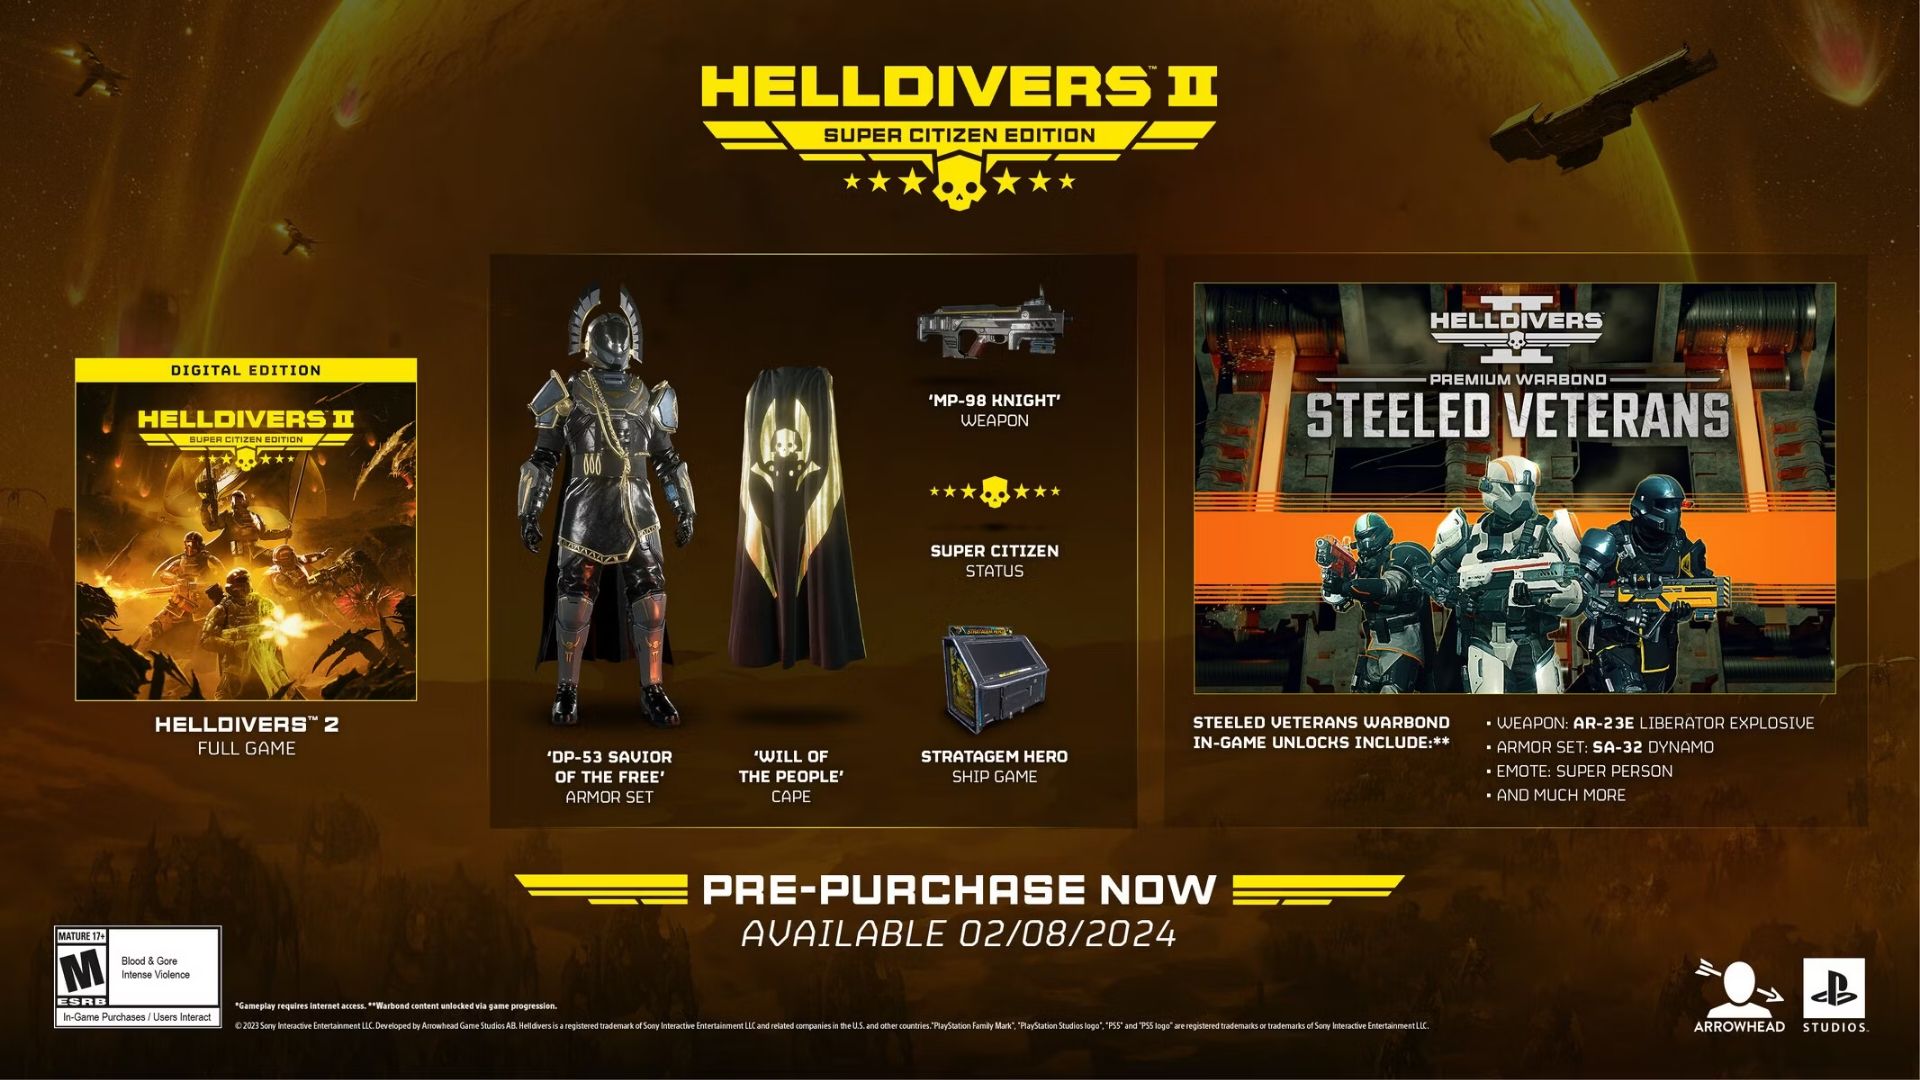 How to Claim Super Citizen Edition Bonuses In Helldivers 2